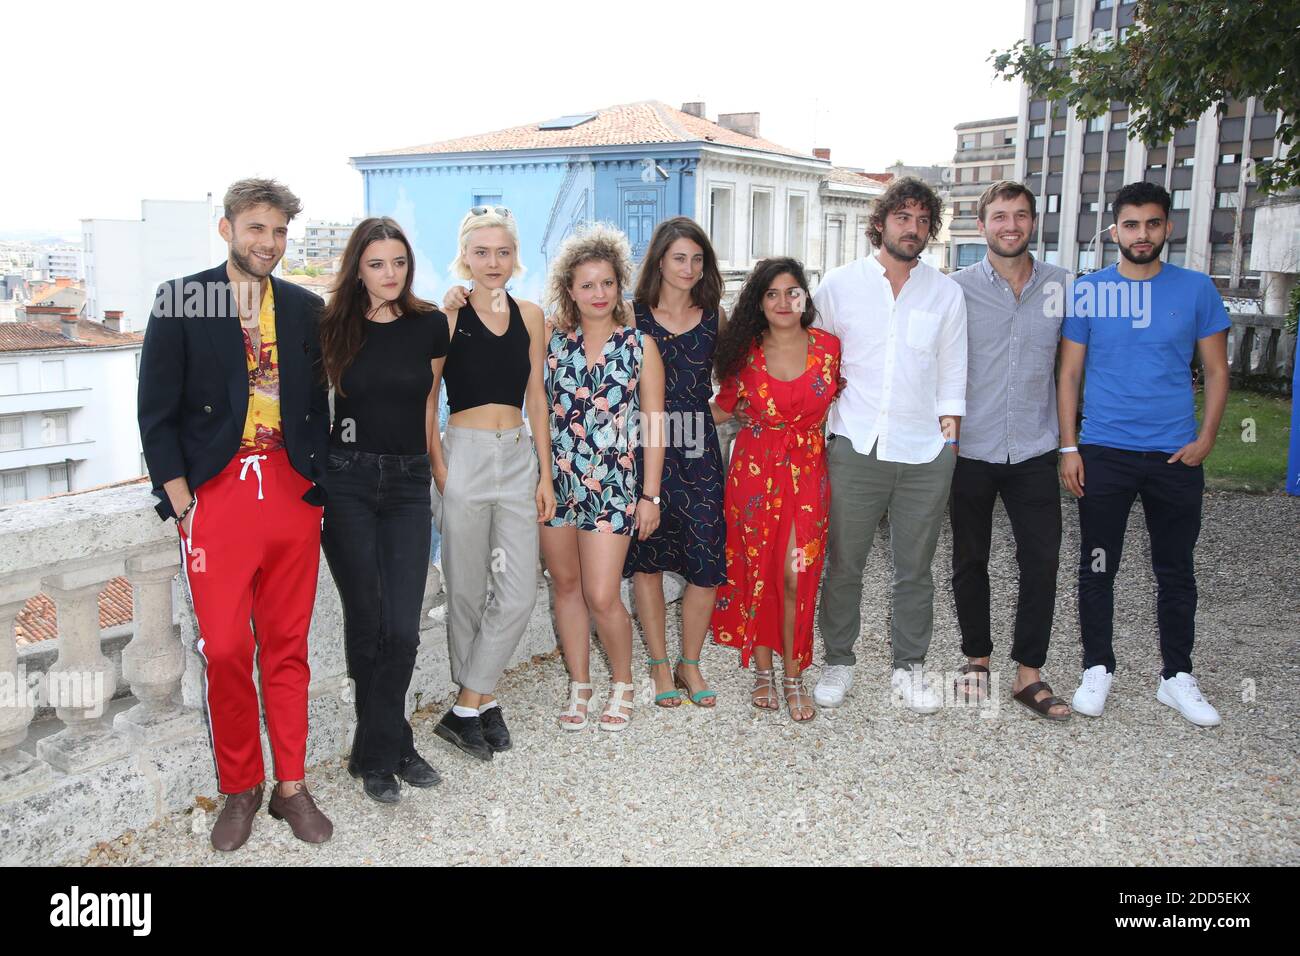 Chloe Astor, Sarah Calcine, Gabrielle Cohen, Guillaume Pottier, Suzanne  Rault-Balet, Soulaymane Rkiba, Jean-Baptiste Sagory, Charles Van De Vyver  et Adele Wismes seen at the Talents ADAMI Photocall as part of the 11th